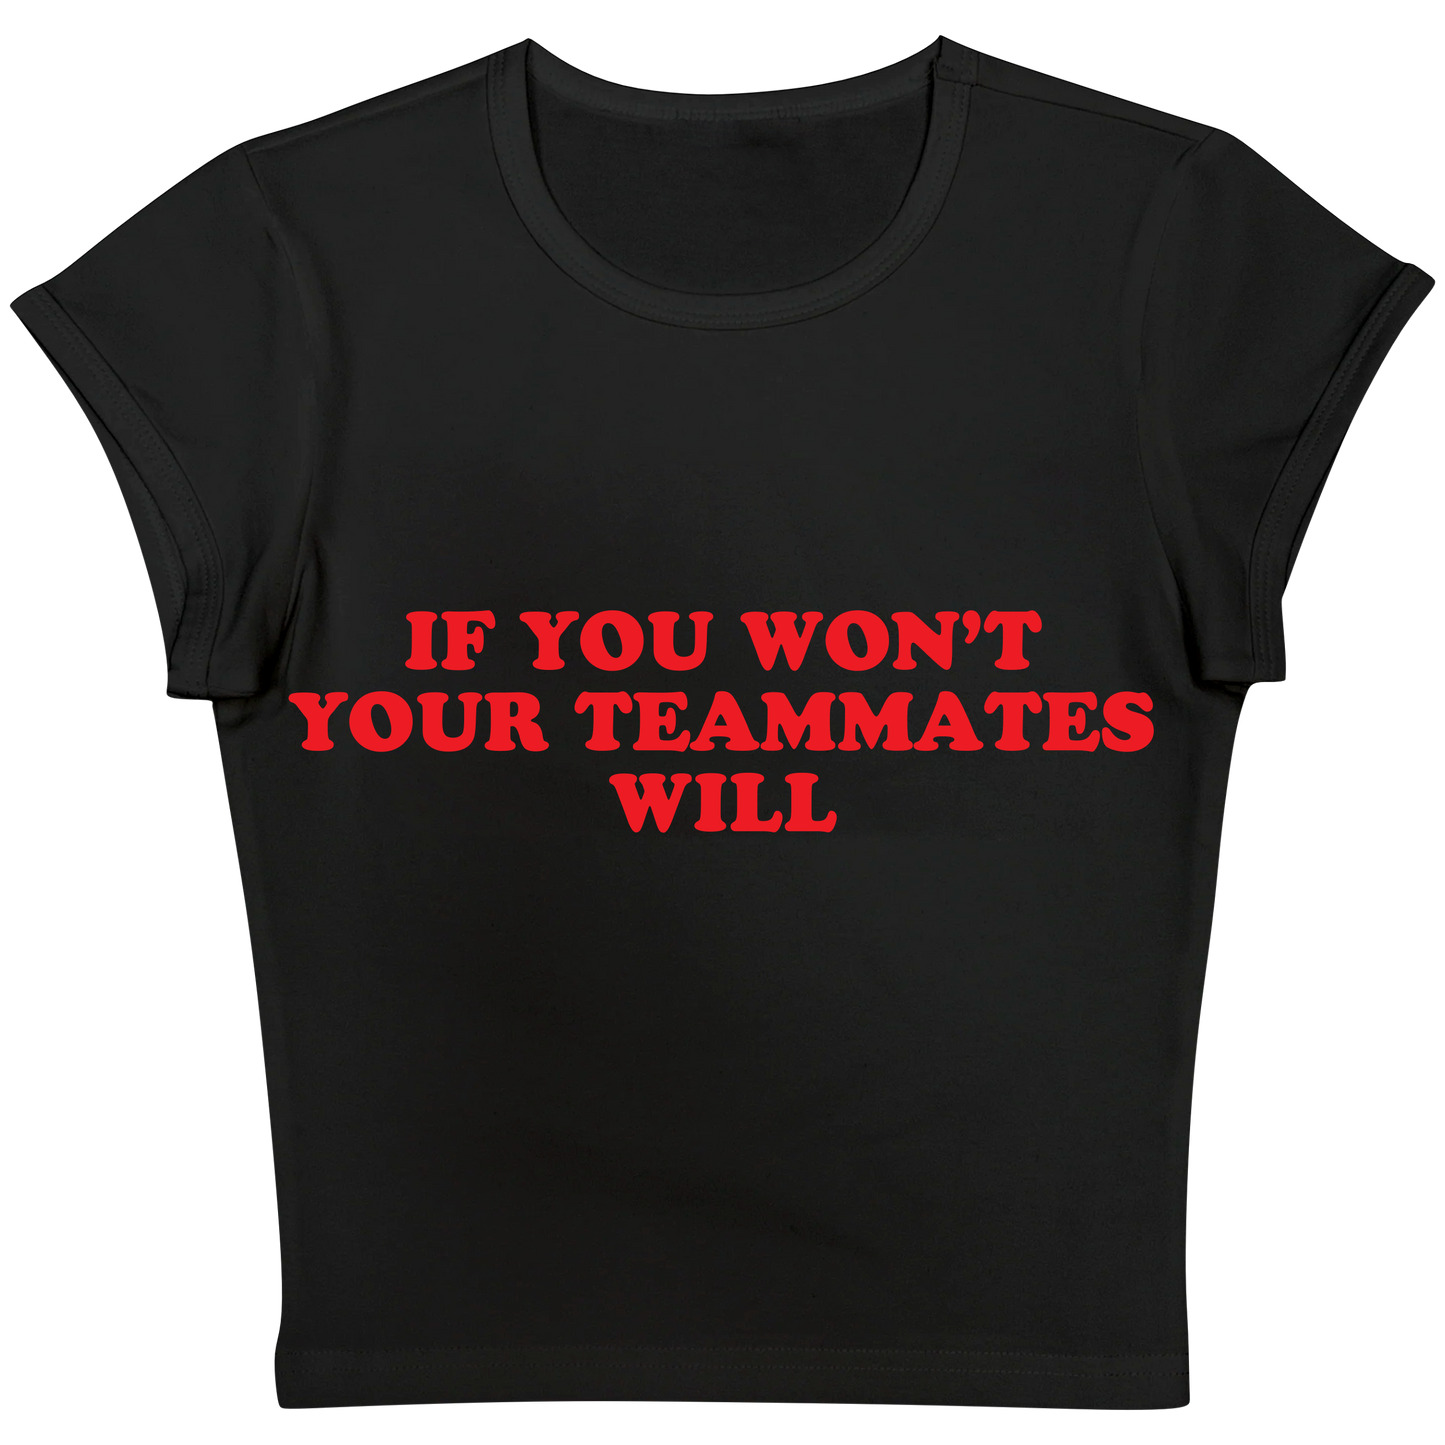 If You Won't Your Teammates Will Baby tee